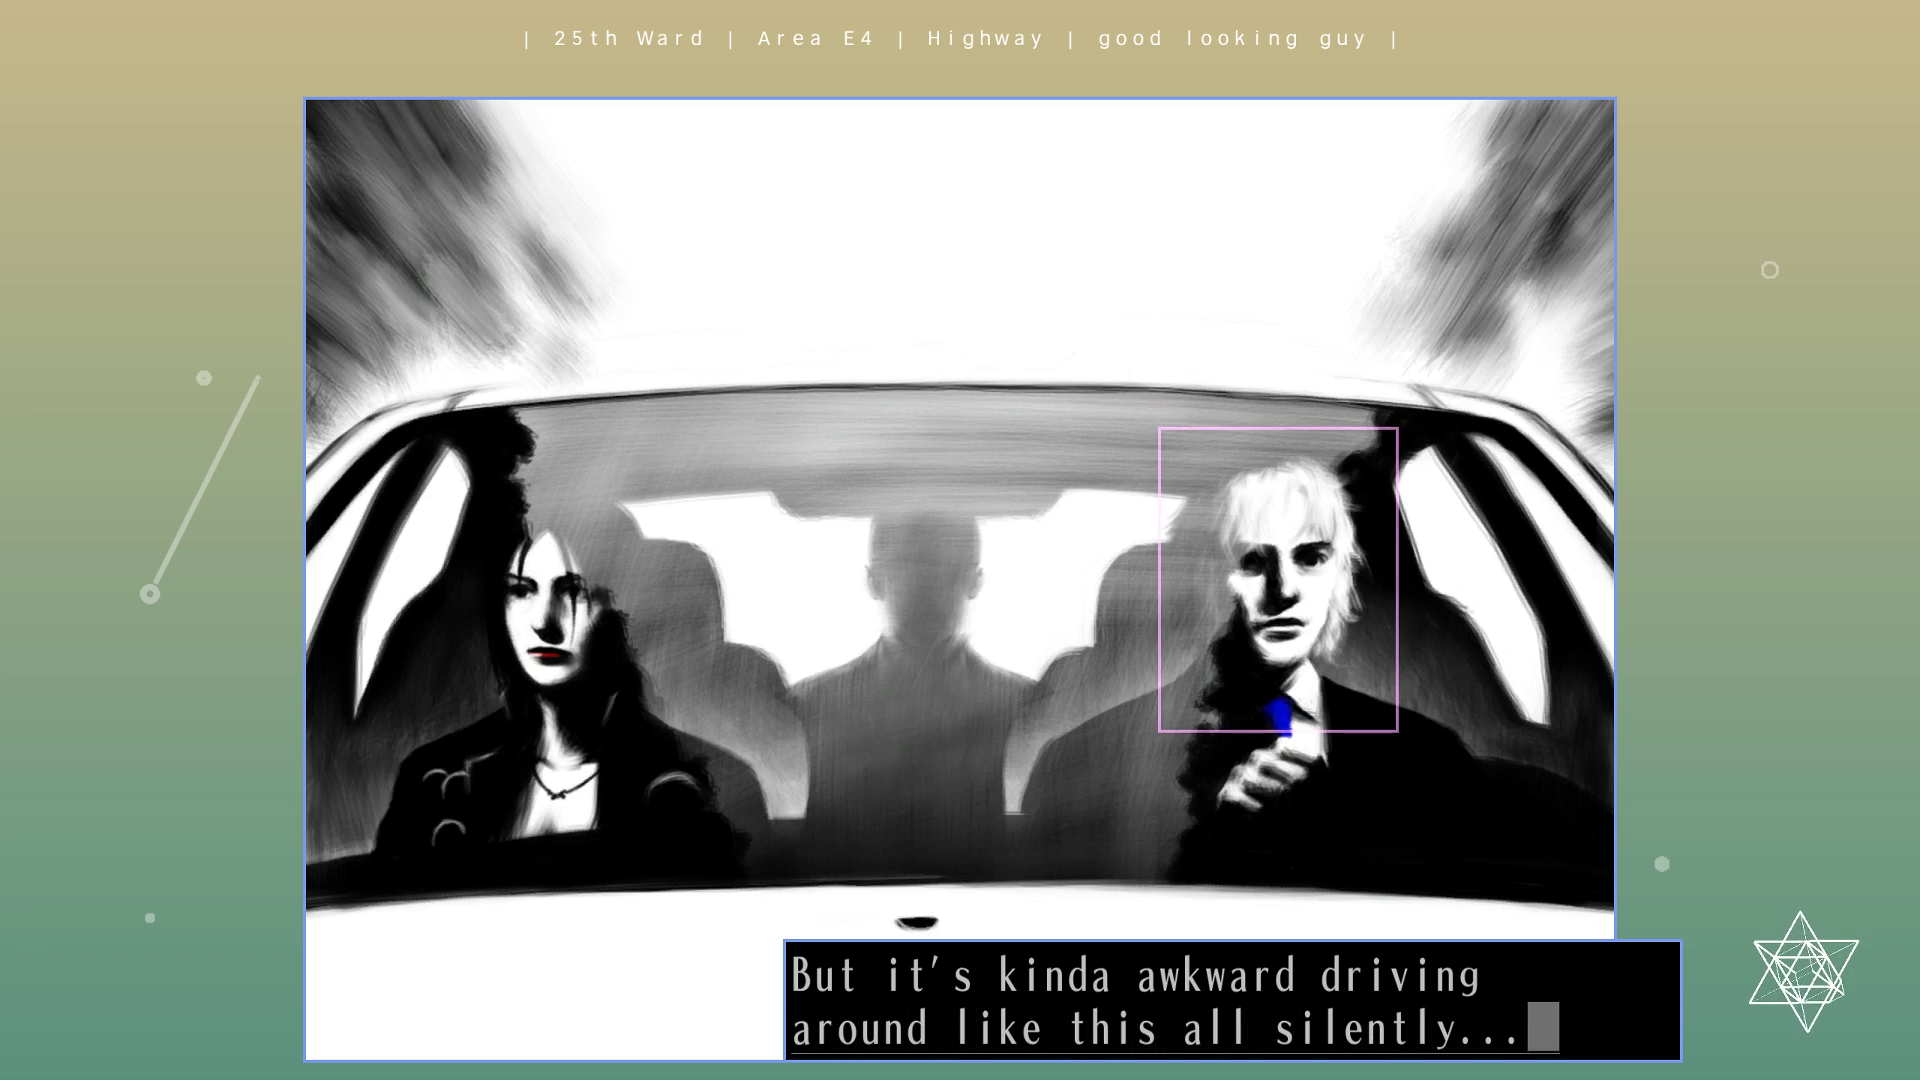 Screenshot from "good looking guy." The central window shows, viewed through the windshield, three people in a car. Shiroyabu drives. Kuroyanagi sits in the front passenger seat. Centered between them, in the back, sits Uehara, a shadowy and intimidating figure. Shiroyabu says, "But it's kinda awkward driving around like this all silently..."